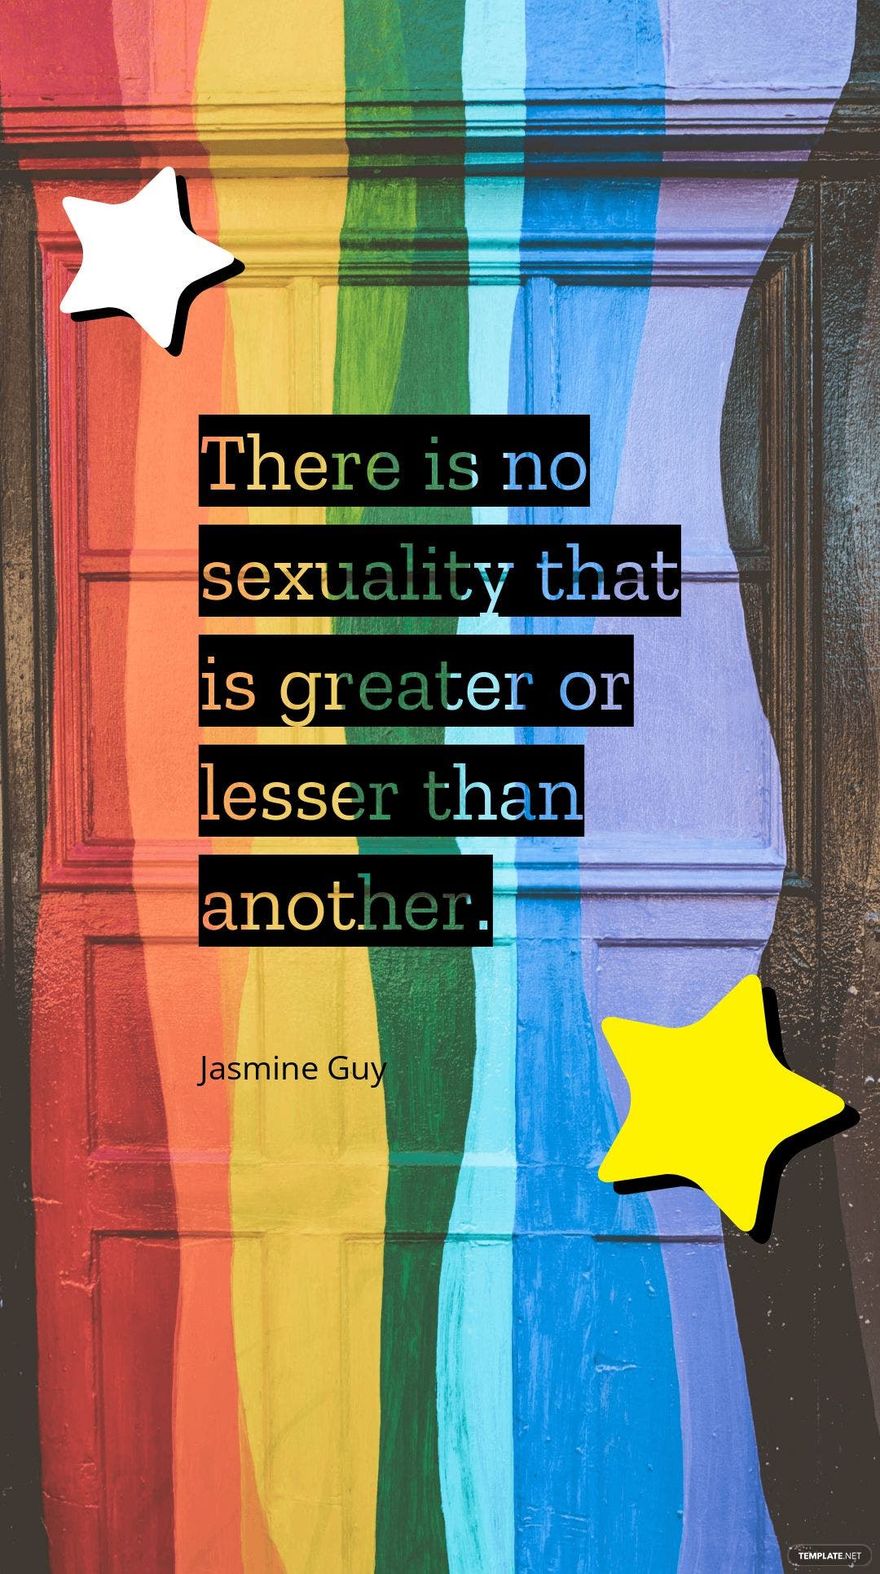 Free Jasmine Guy - There is no sexuality that is greater or lesser than another.